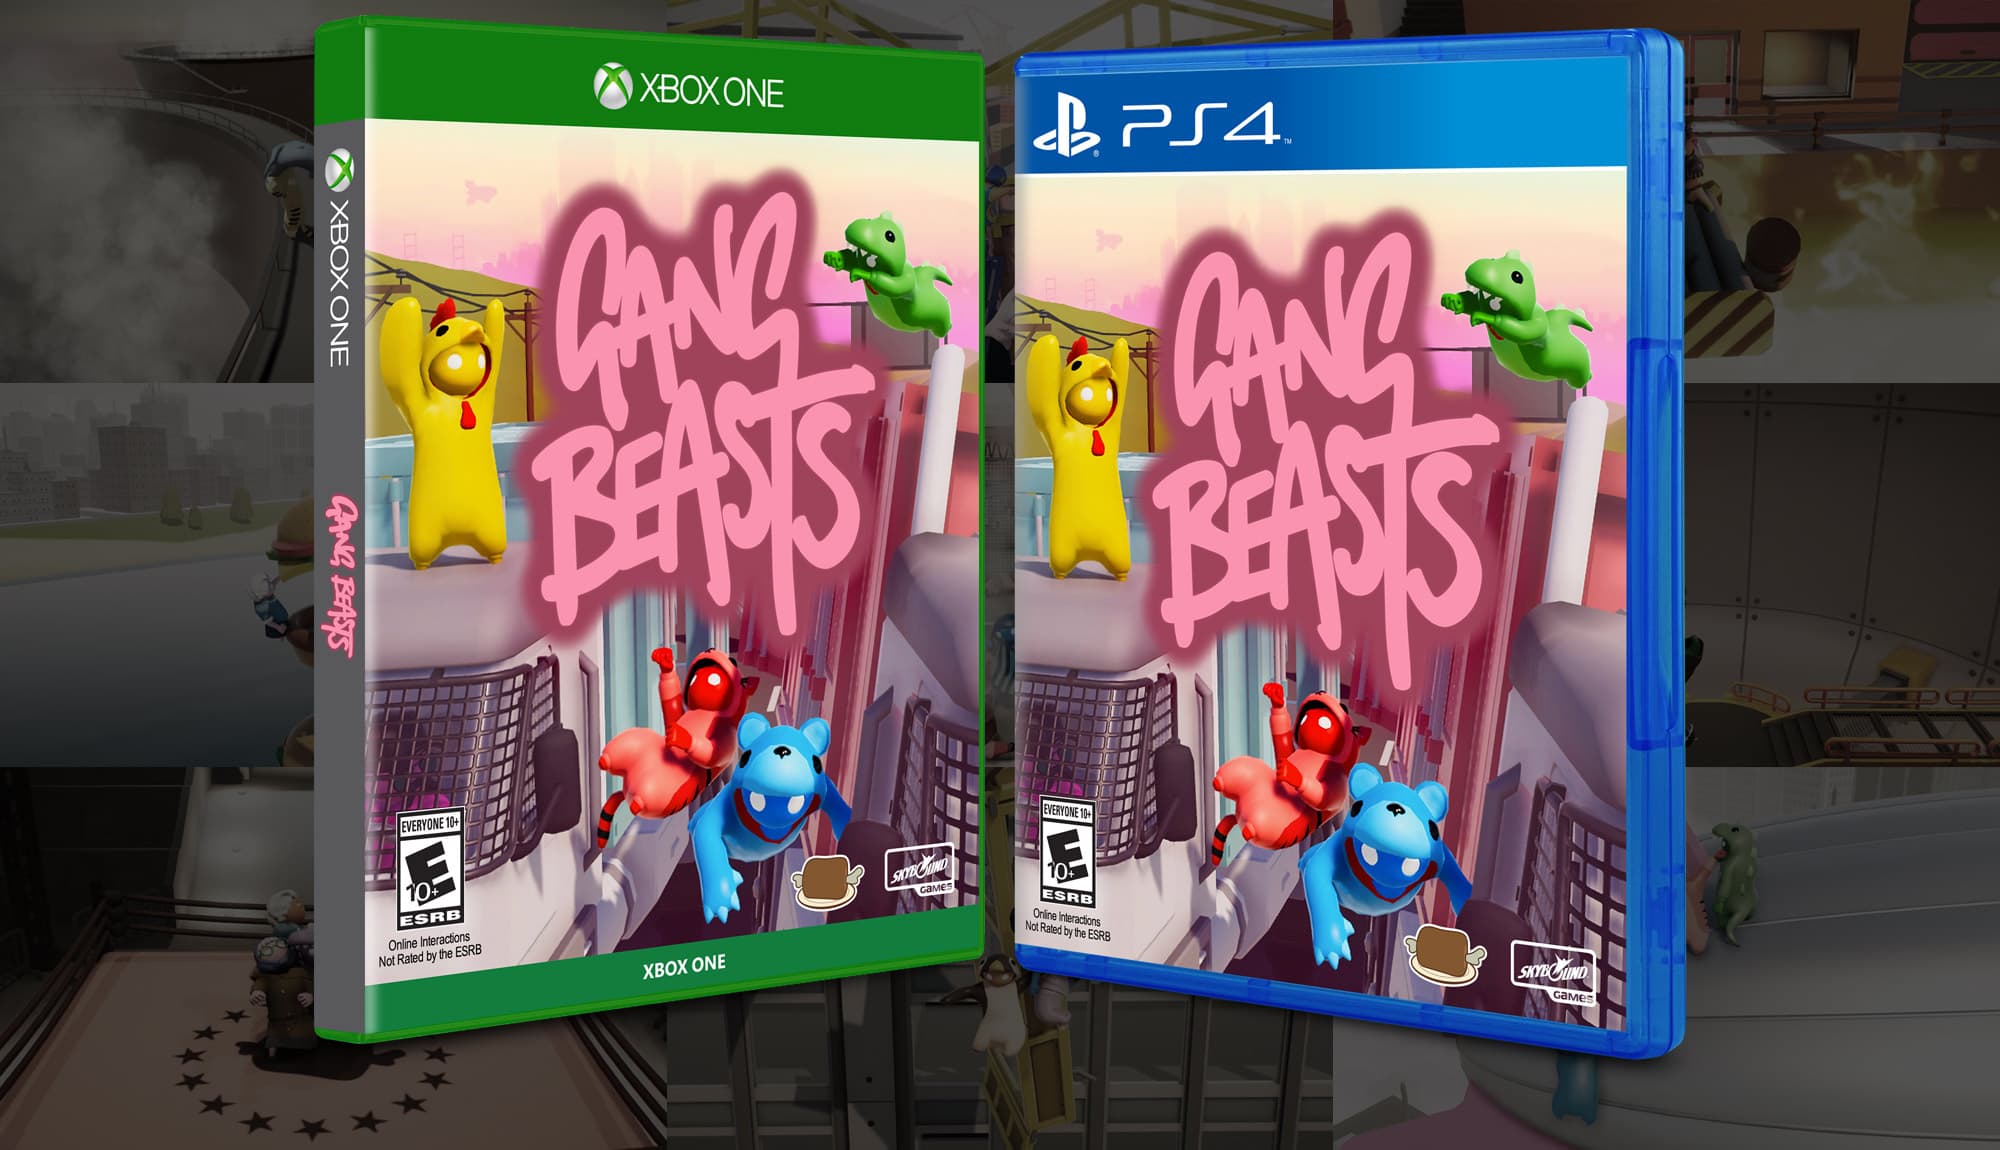 Gang Beasts Hitting Consoles This December!